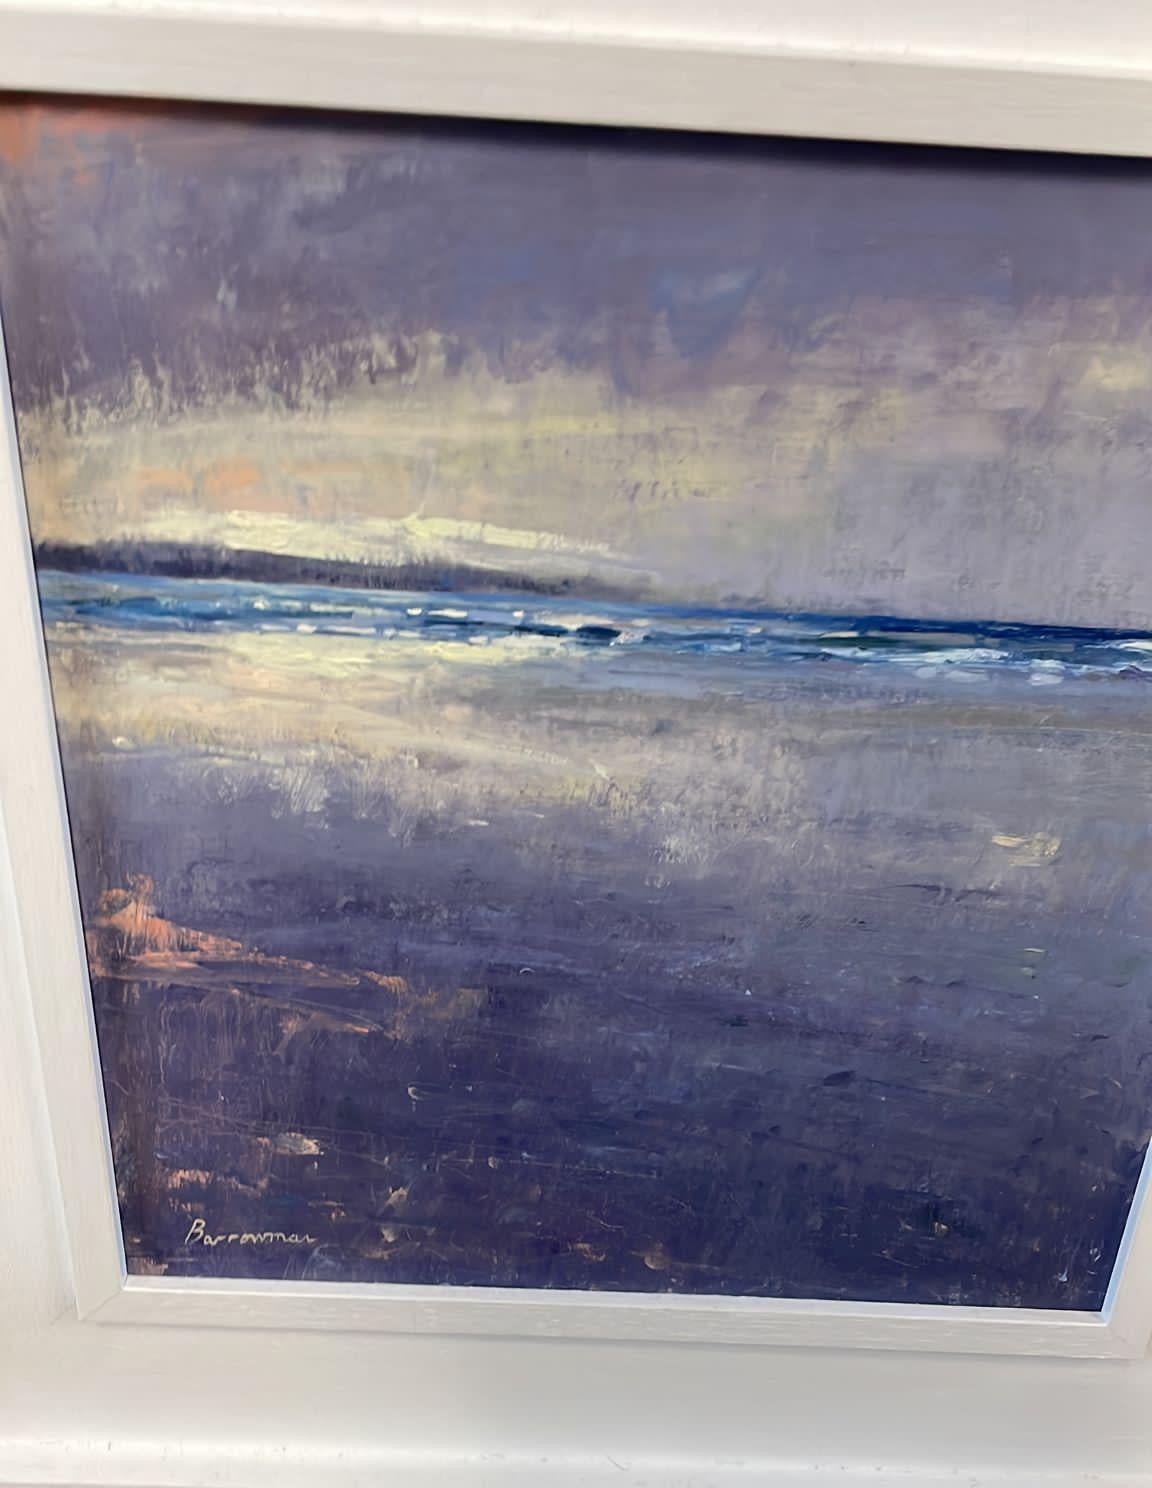 Original oil painting of St Ives viewed across St Ives Bay at last light from Gwithian Beach in Cornwall. Oils on board - Framed in a clean white tray style moulding.

Additional information:
Andrew Barrowman
St Ives from Gwithian, last light